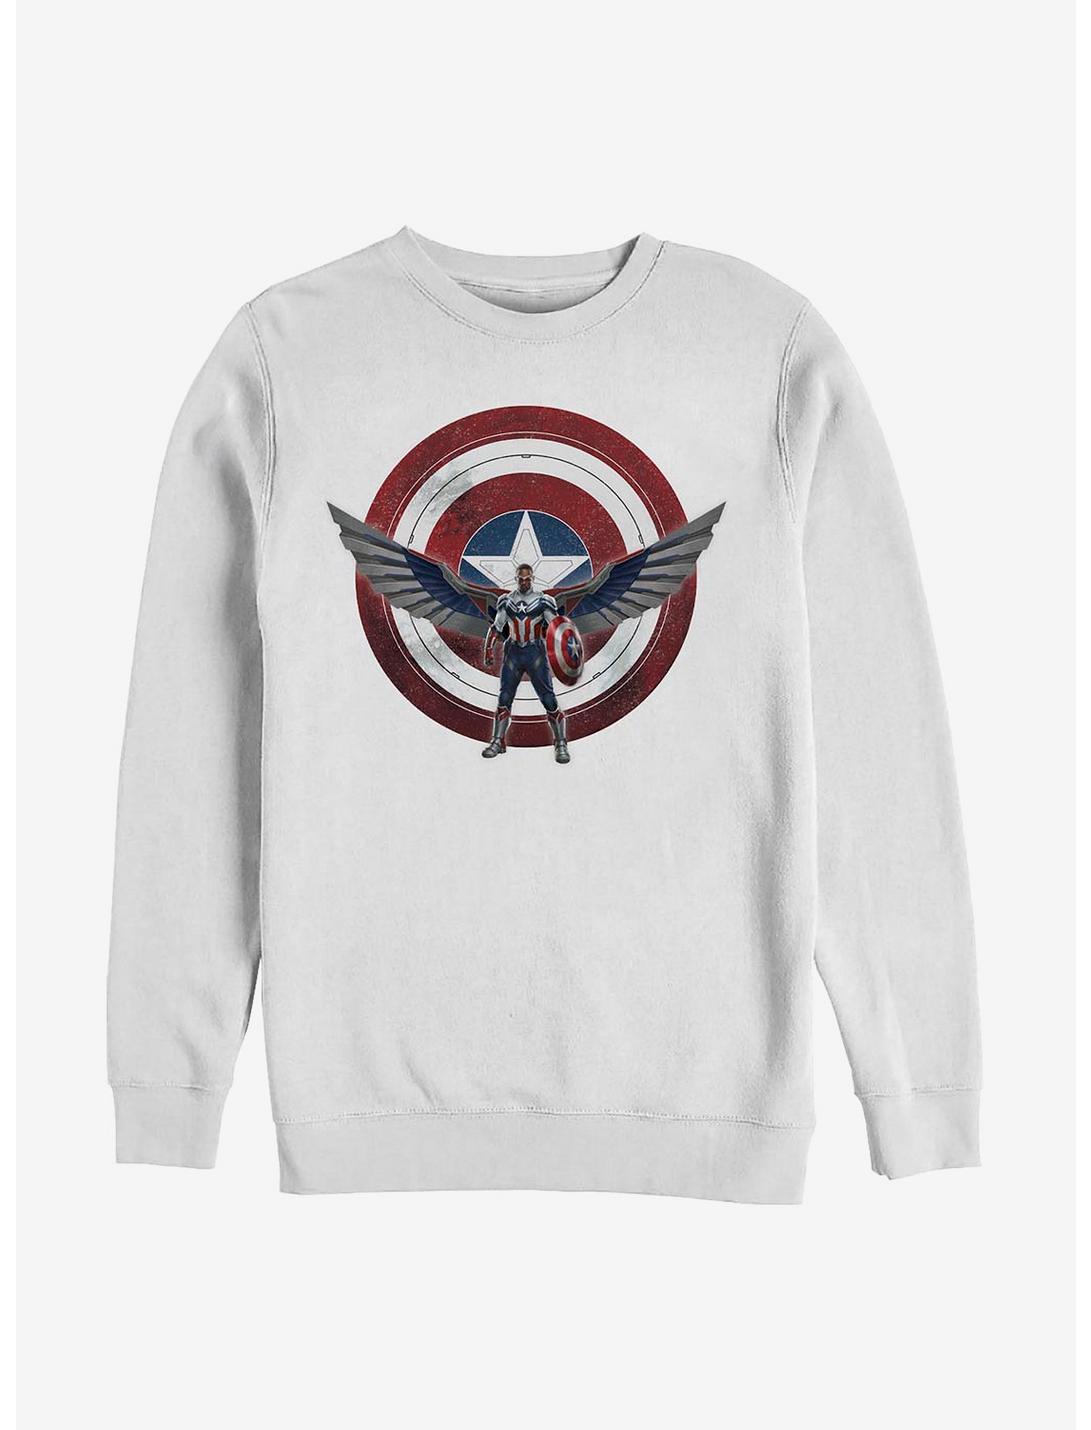 Marvel The Falcon And The Winter Soldier Wield Shield Sweatshirt, WHITE, hi-res